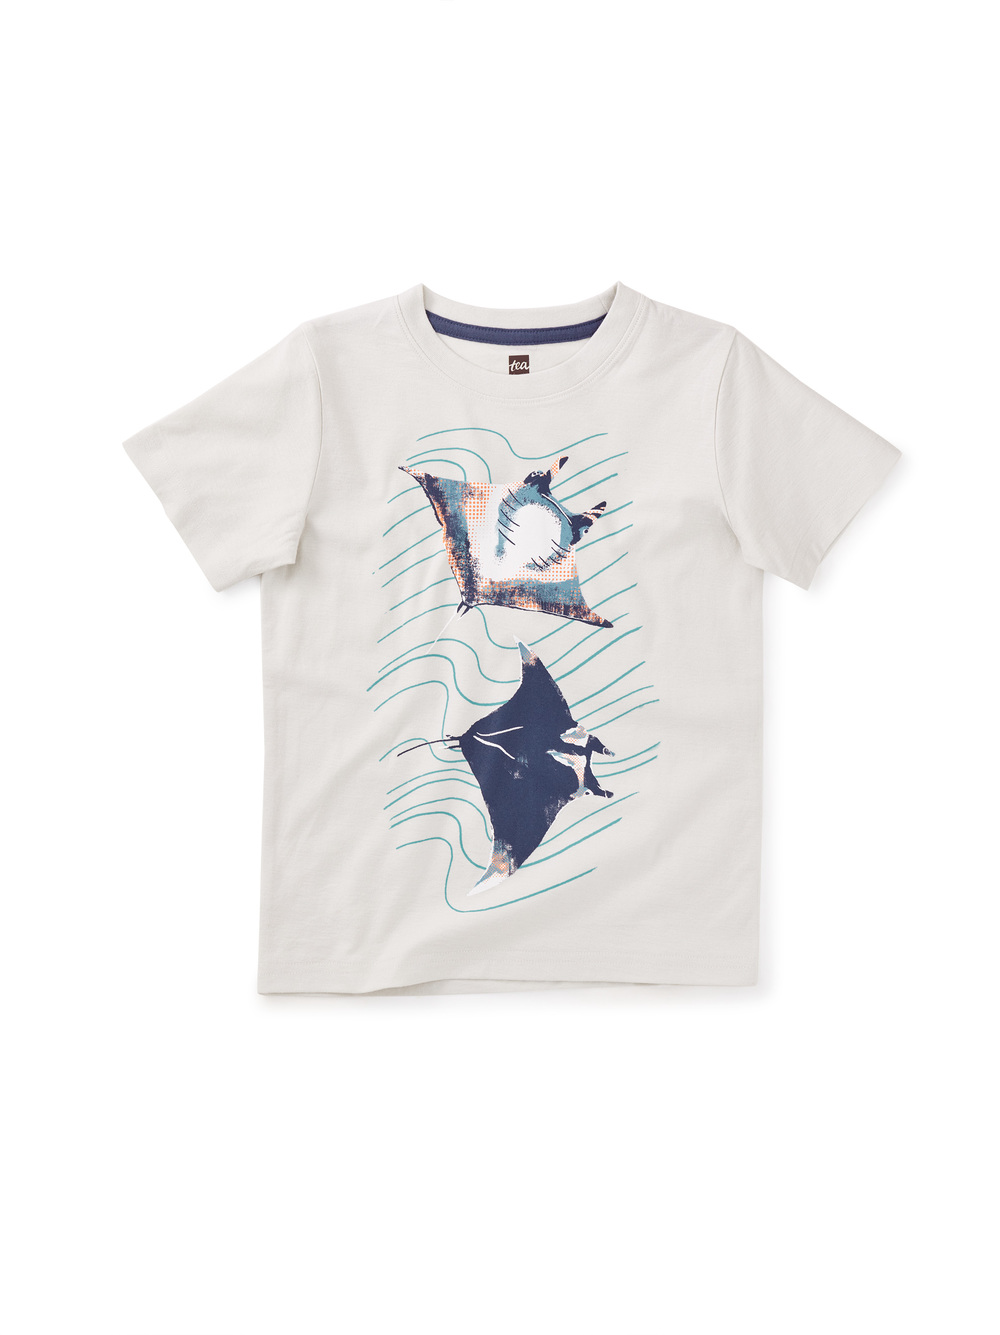 Sting Rays Graphic Tee | Tea Collection